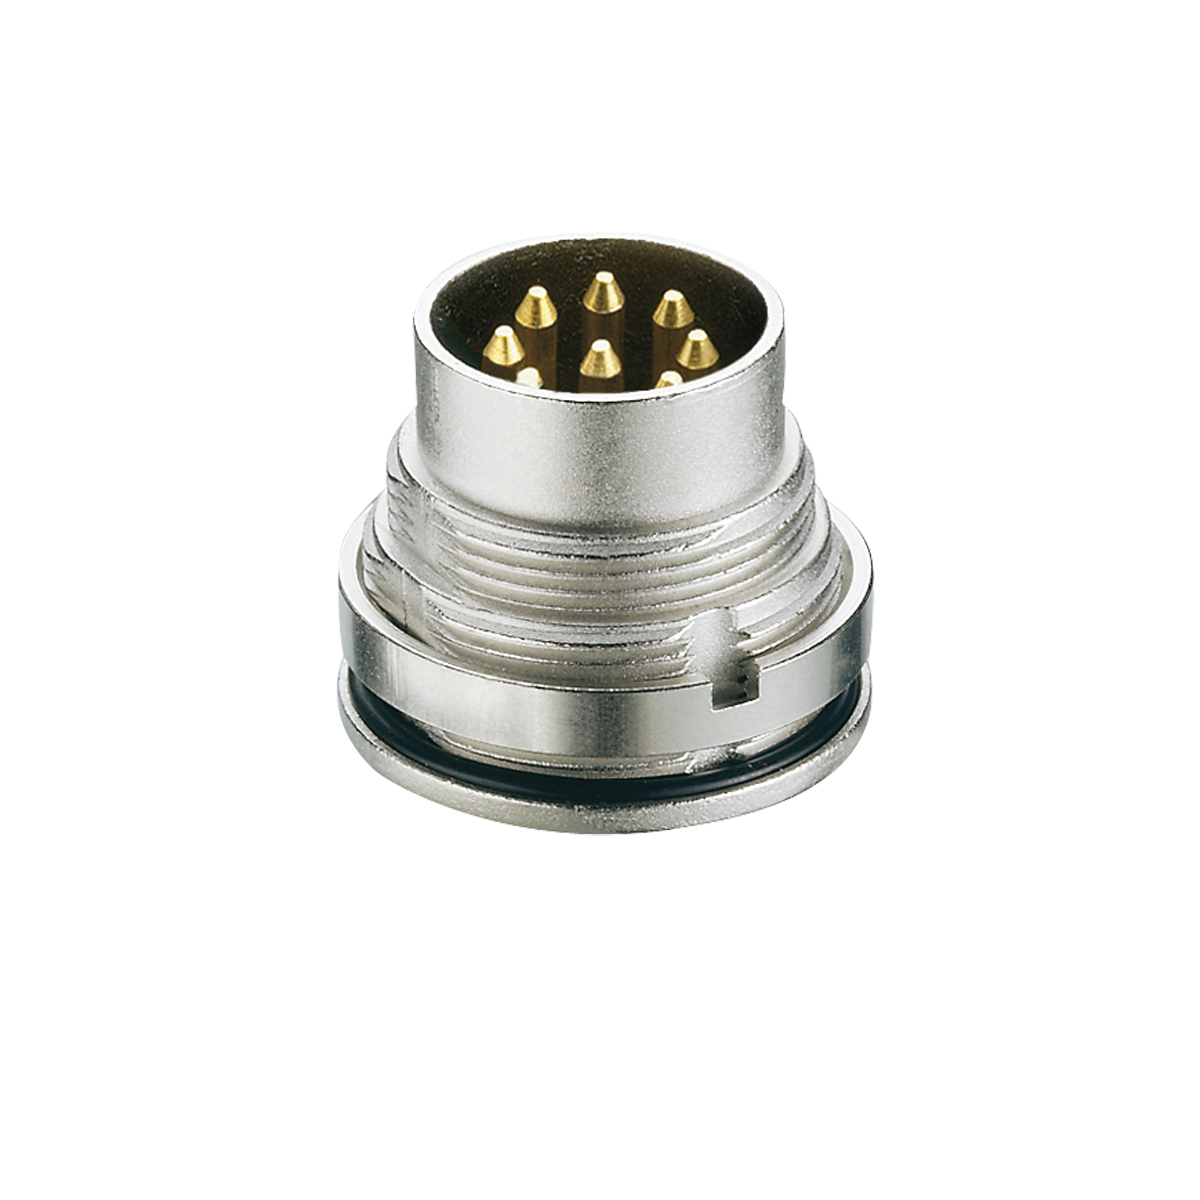 Lumberg: 0315-1 (Series 03 | Circular connectors with threaded joint M16 acc. to IEC 61076-2-106, IP40/IP68)